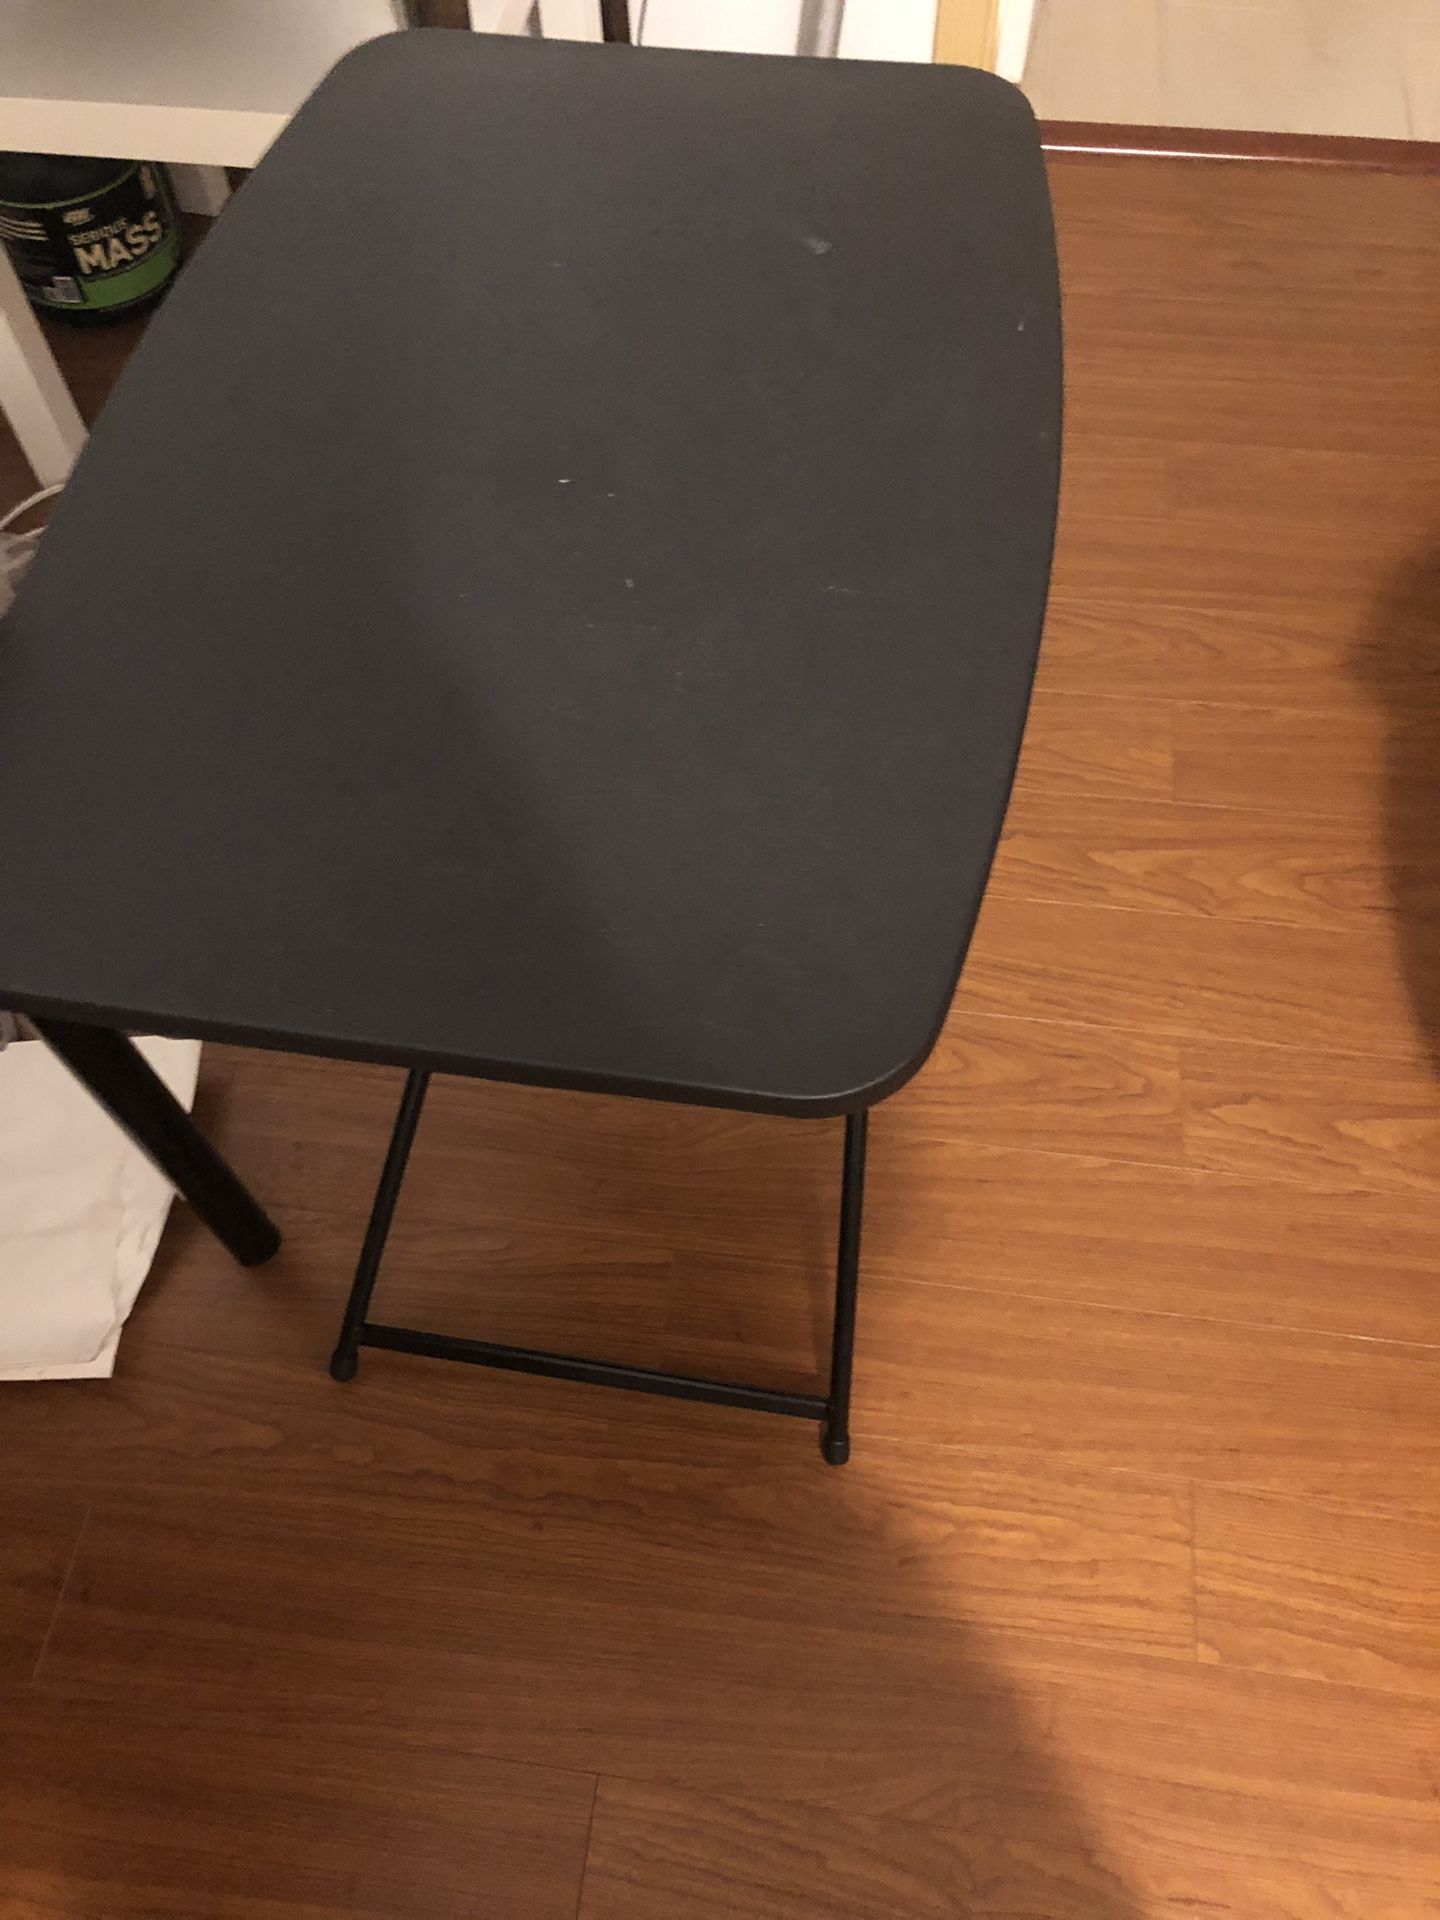 (FREE) foldable table